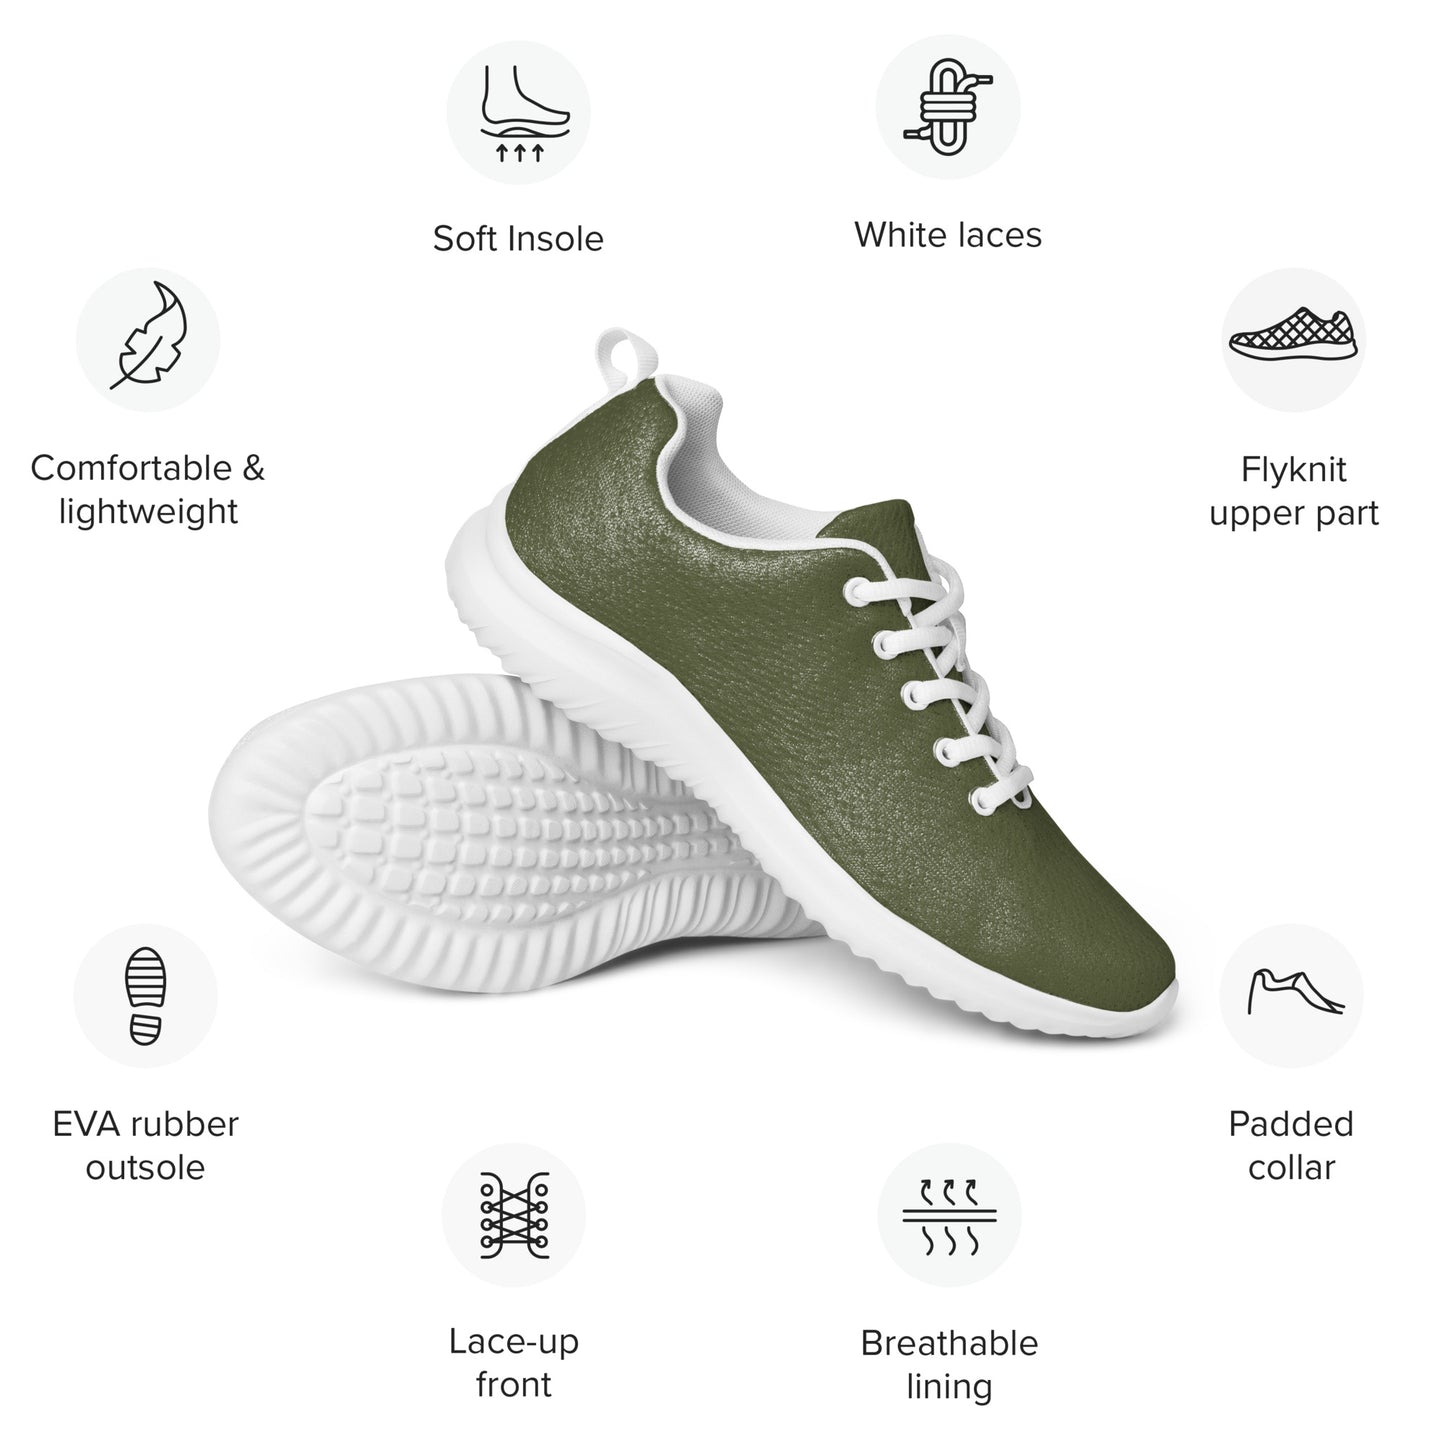 DASH Army Green Women’s Athletic Shoes Lightweight Breathable Design by IOBI Original Apparel